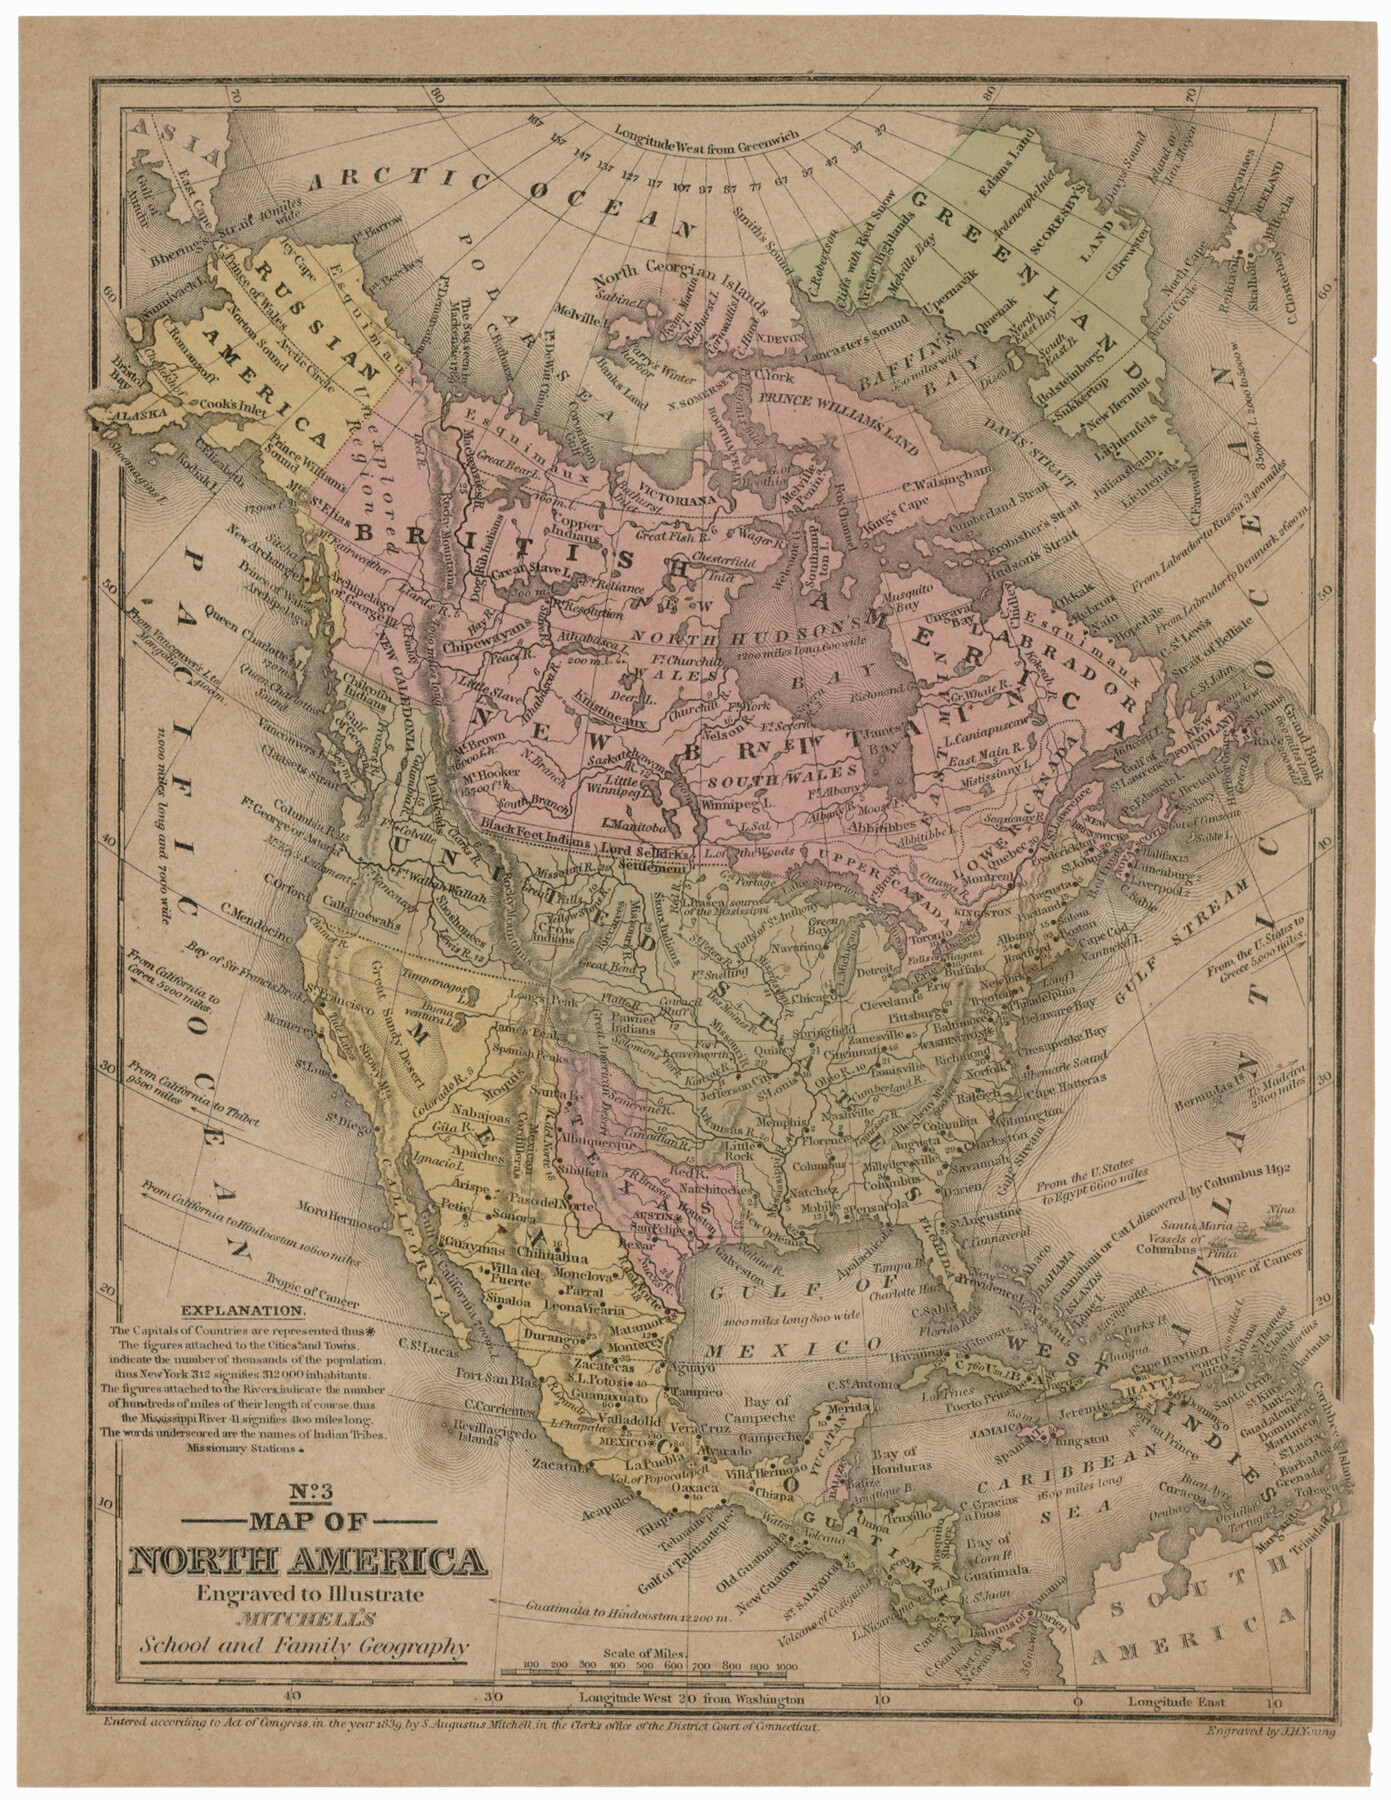 93552, Map of North America engraved to illustrate Mitchell's school and family geography, Non-GLO Digital Images